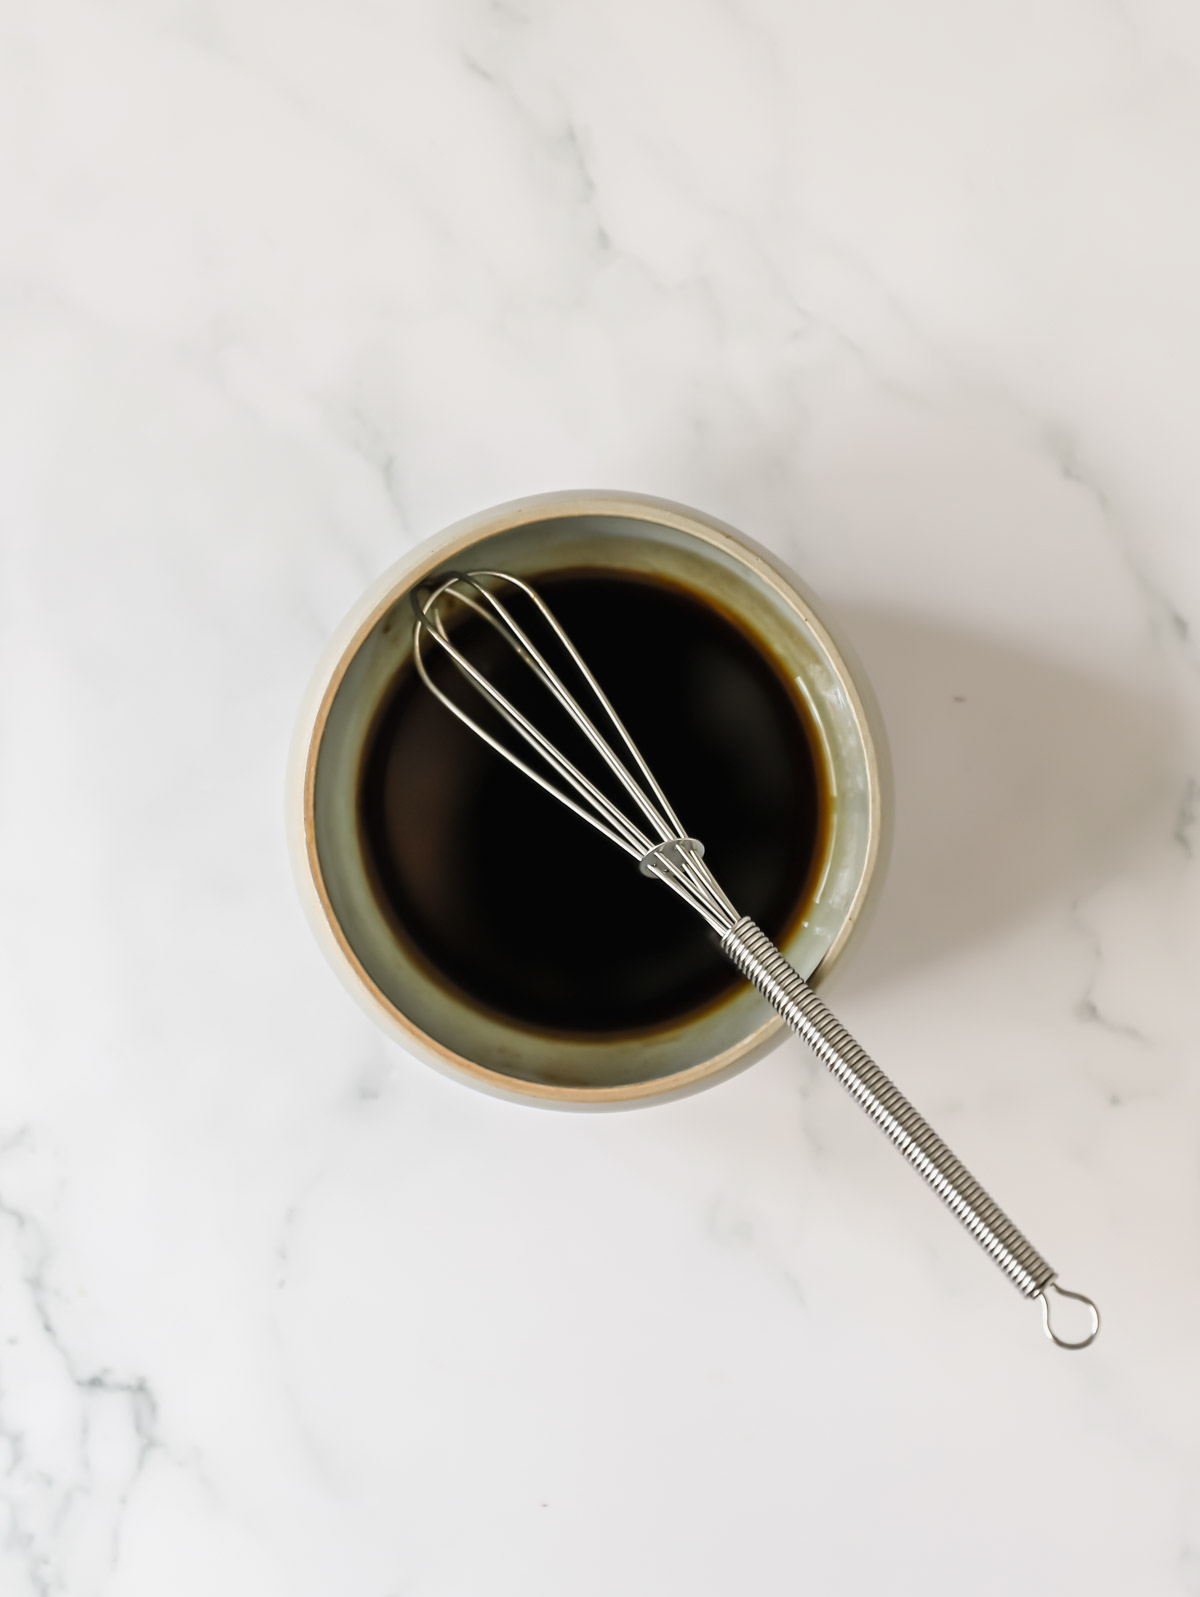 A small bowl of balsamic dressing with a whisk on top.